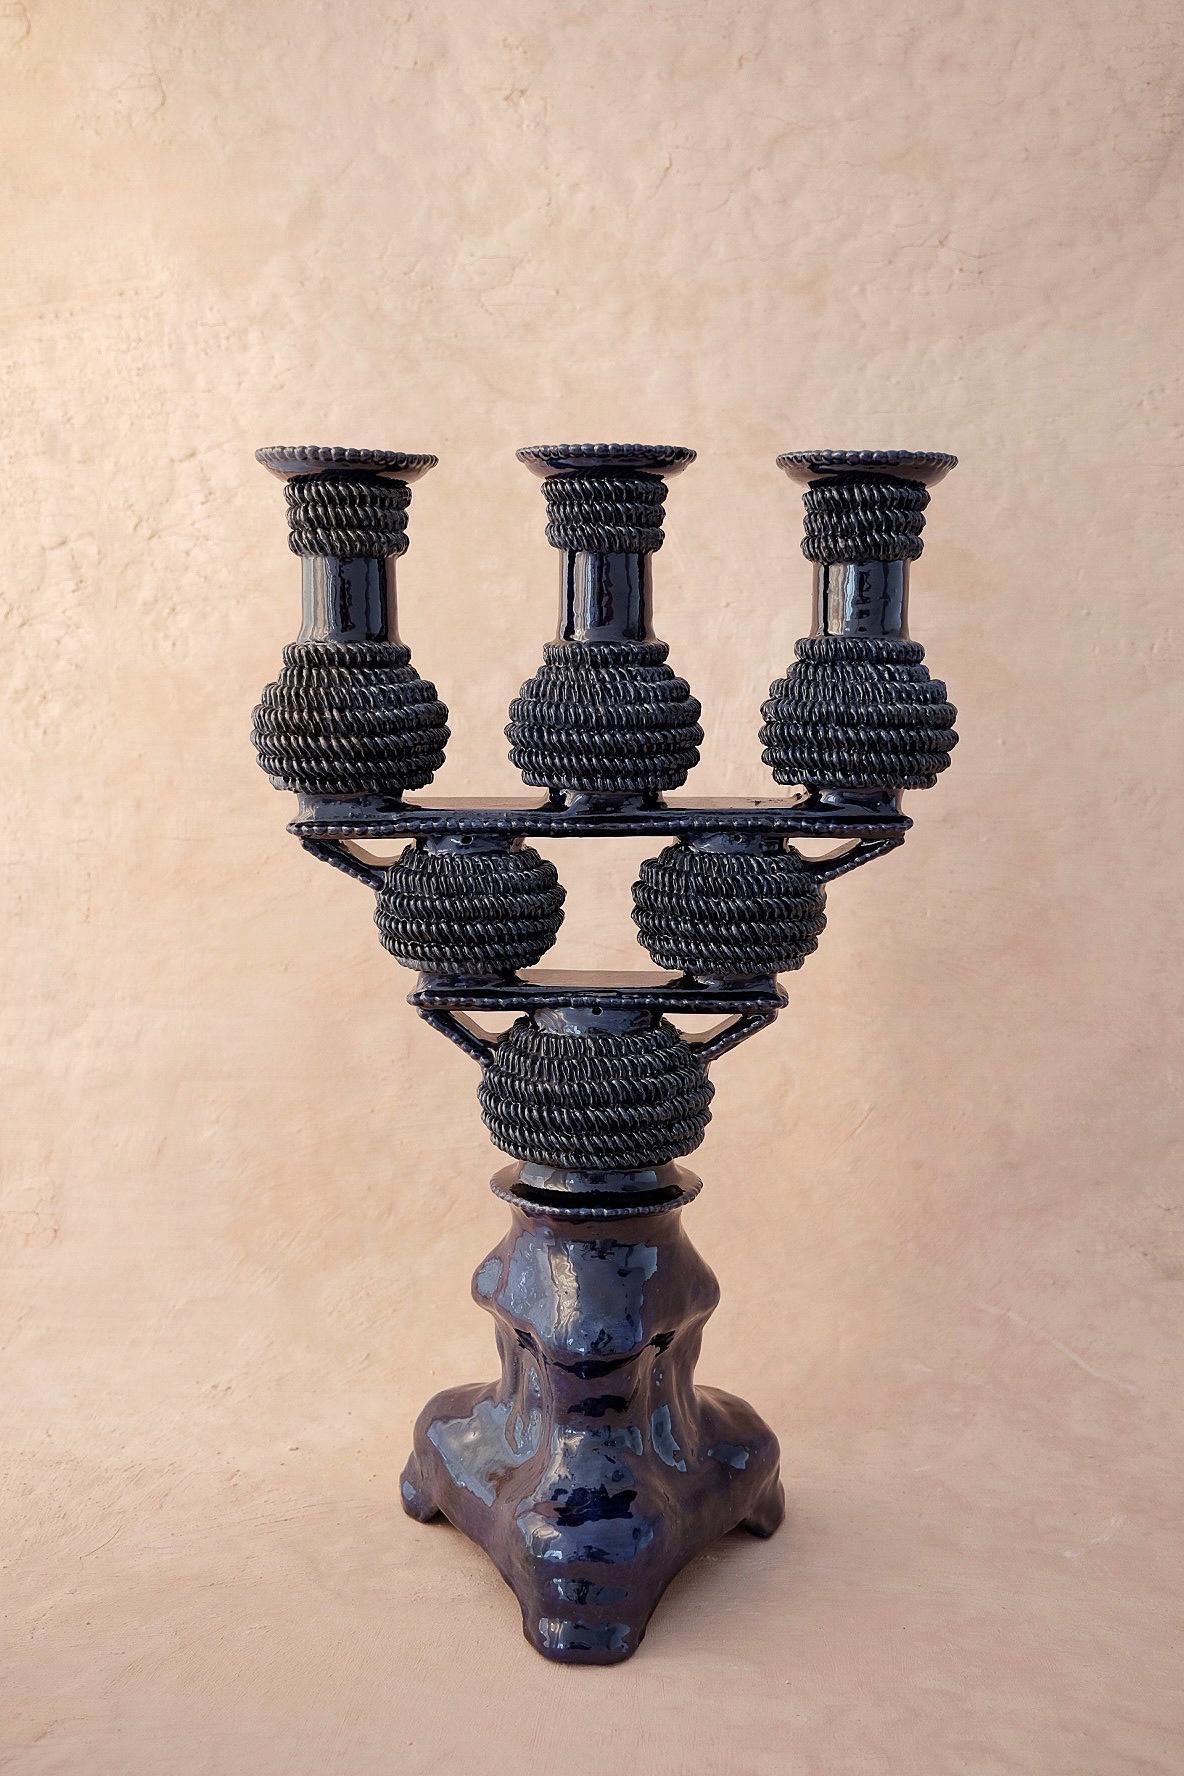 Tres Luces Candleholder by Onora
Dimensions: W 28 x H 45.7 cm
Materials: Clay, Glazed pottery

Hand sculpted clay, covered with a mineral based slip and burnished using a quartz stone. The “Circo Collection” is a reproduction of Herón Martínez